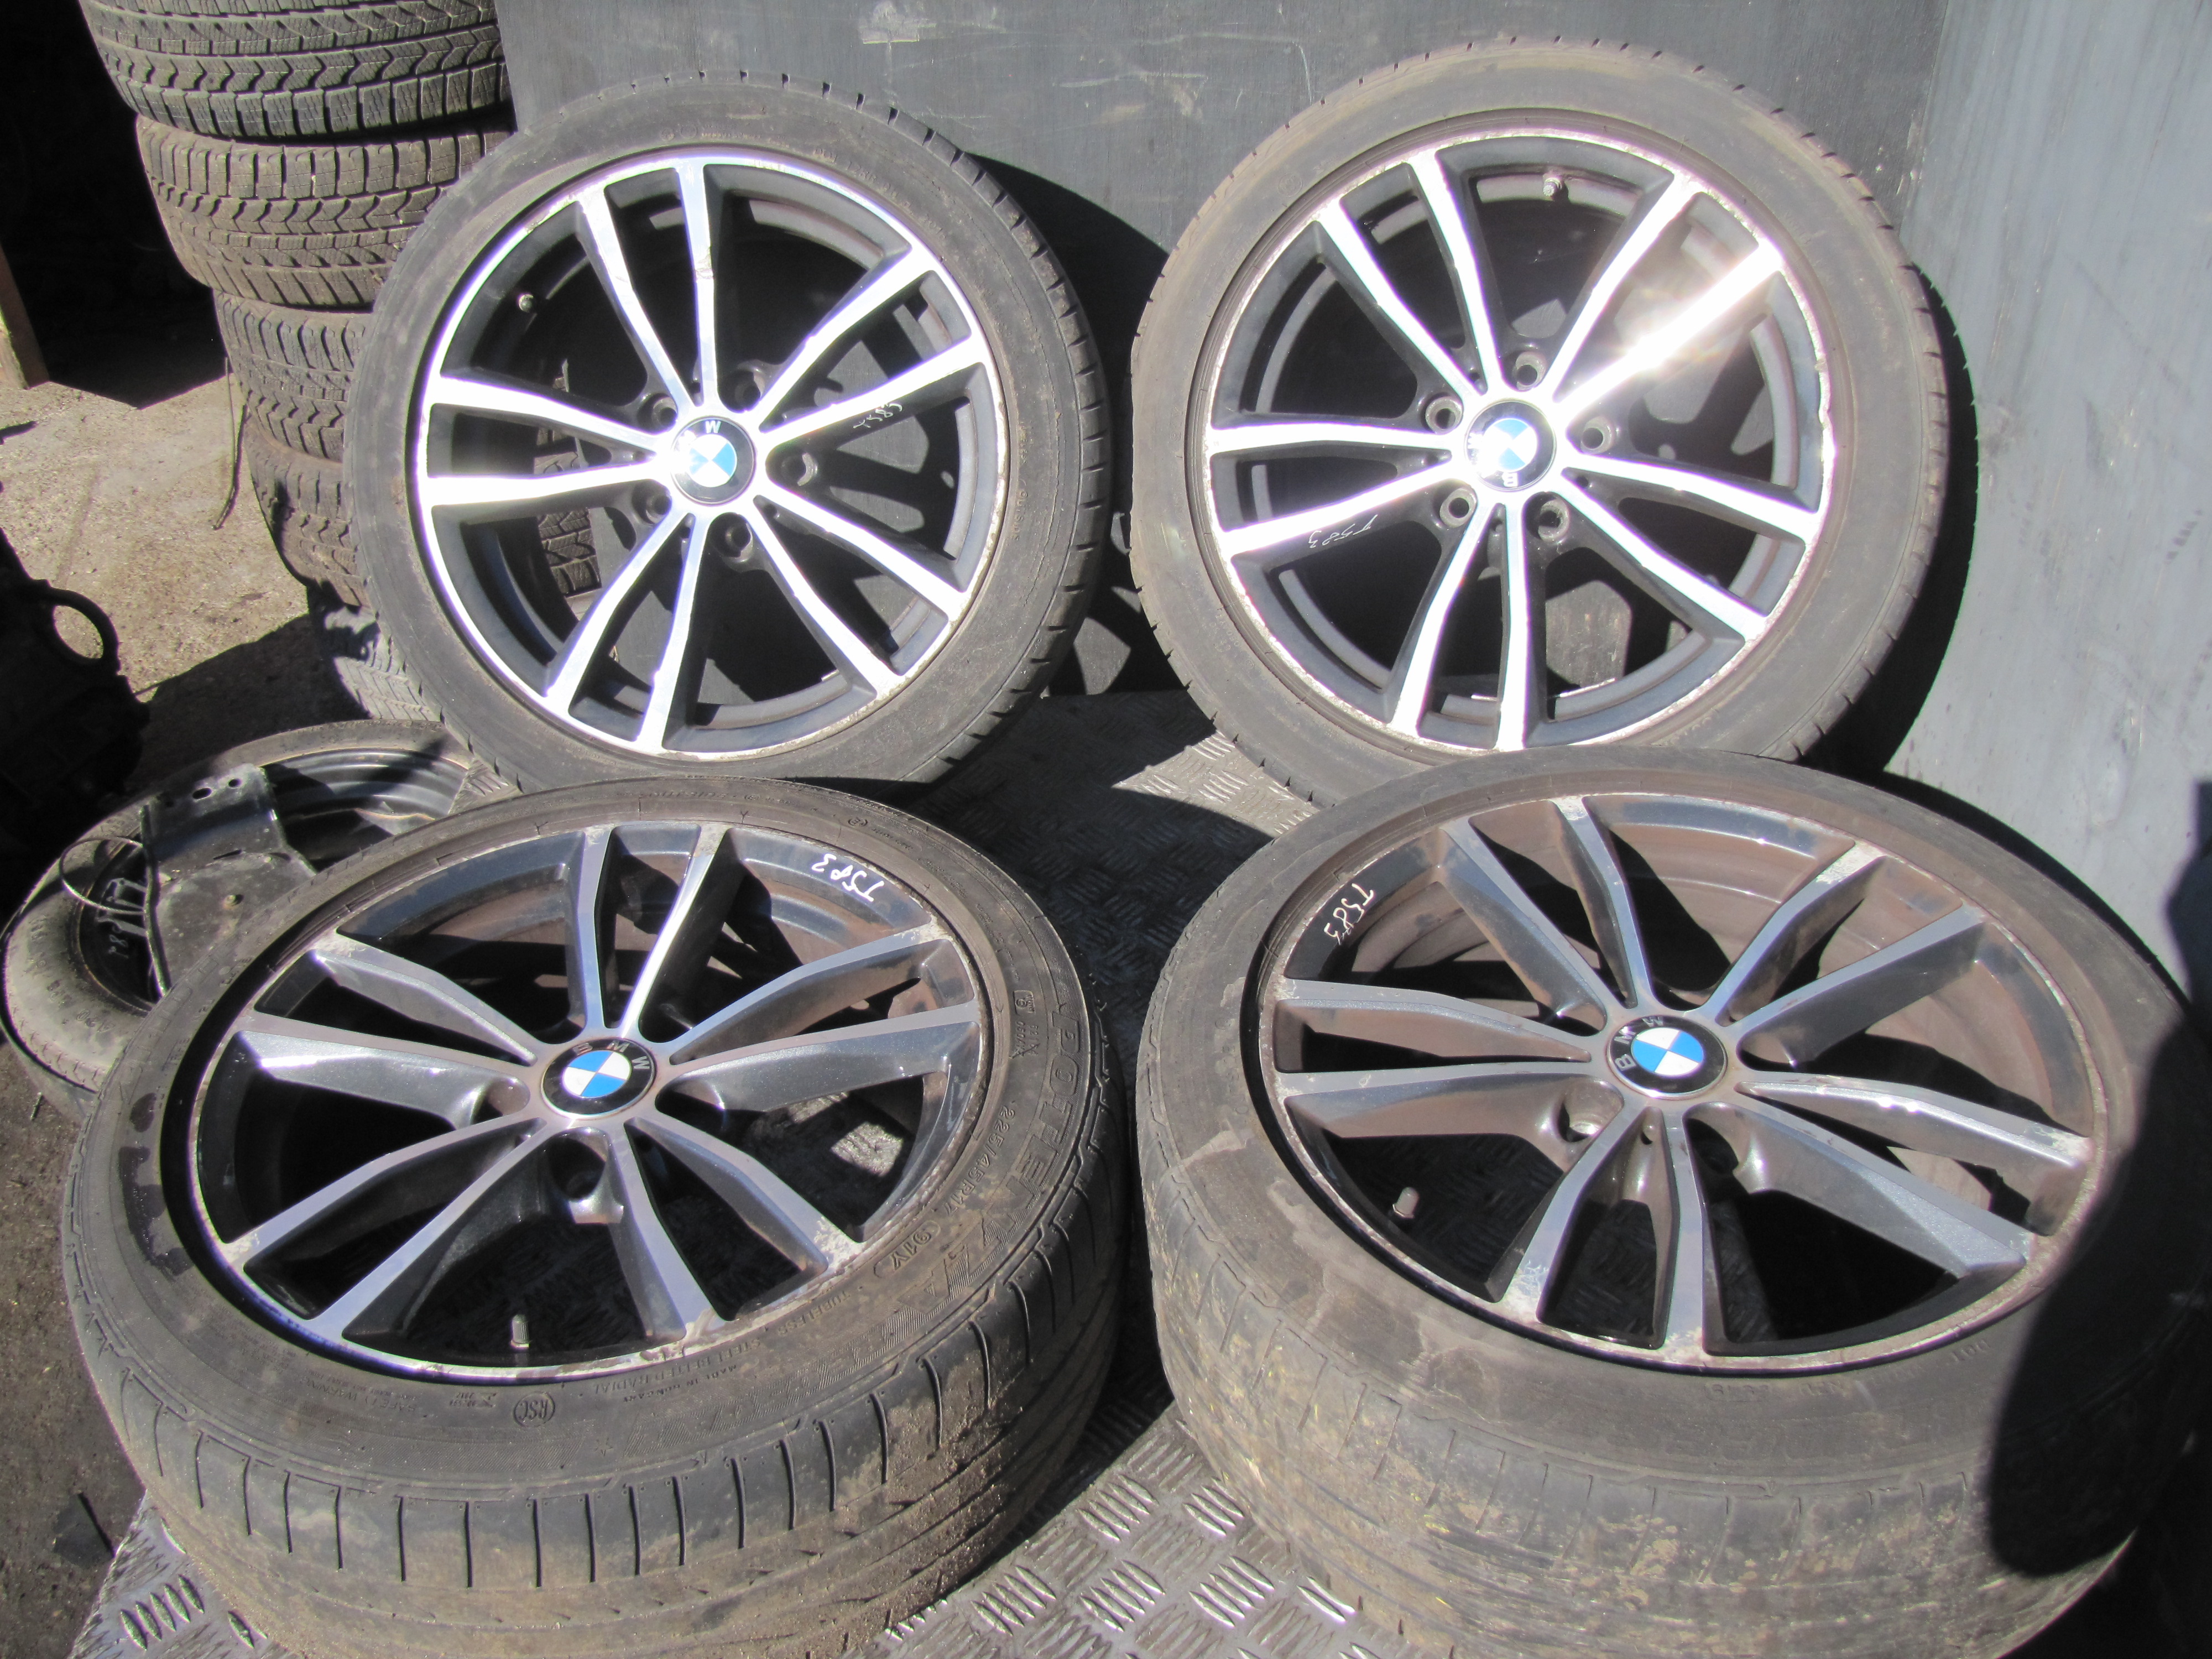 BMW 2 Series F22/F23 (2013-2020) Wheel Set (without tires) 6879186, 6890429 23449457